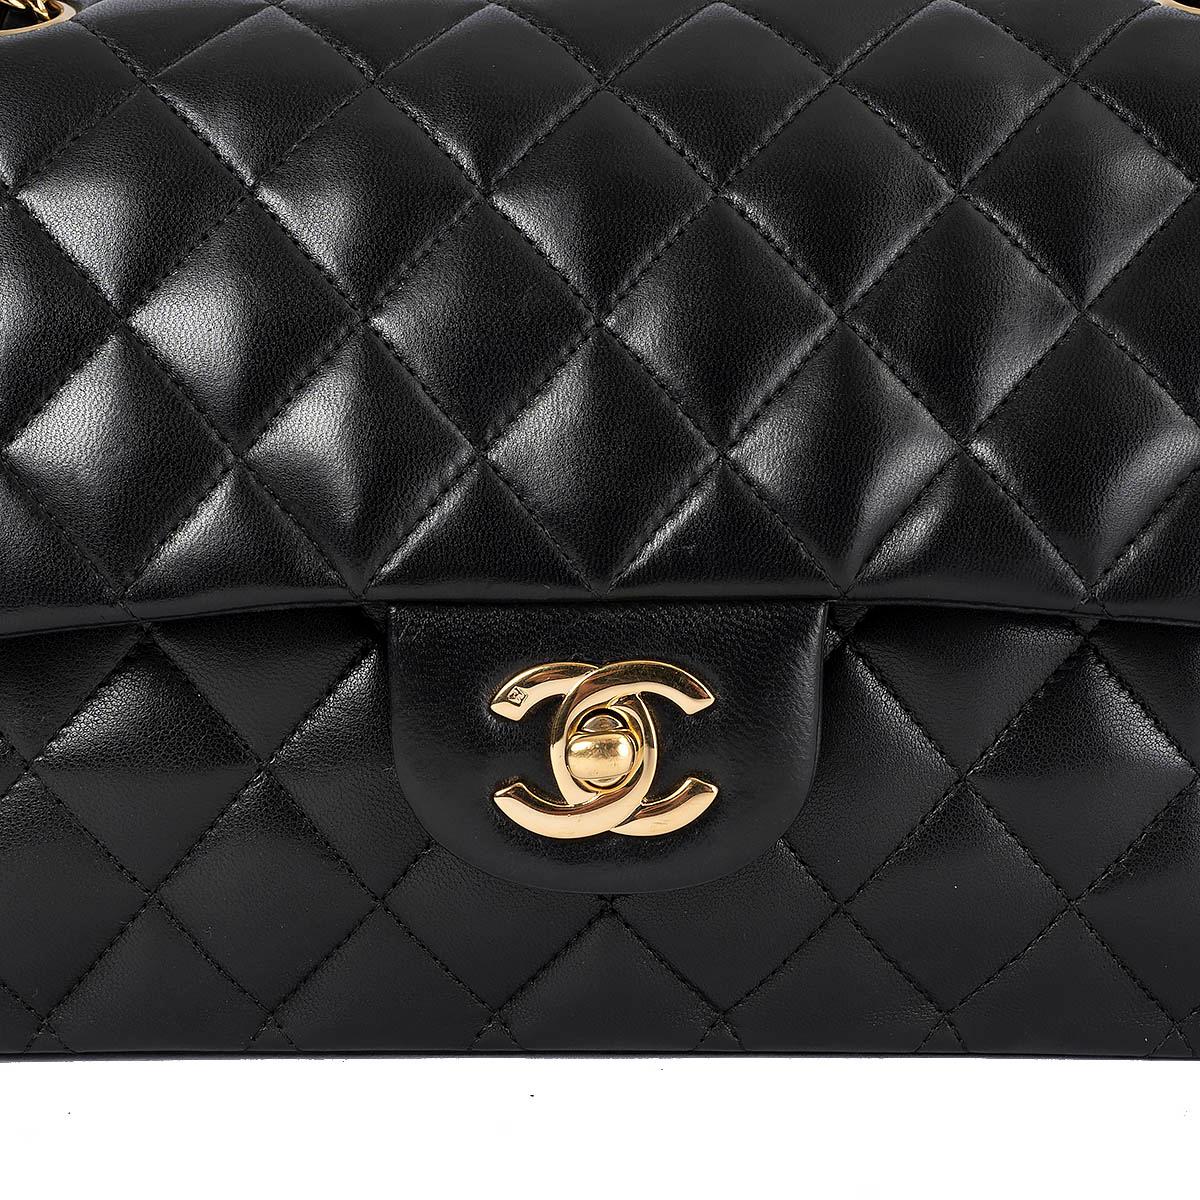 CHANEL black quilted lambskin leather CLASSIC MEDIUM TIMELESS Shoulder Bag 2